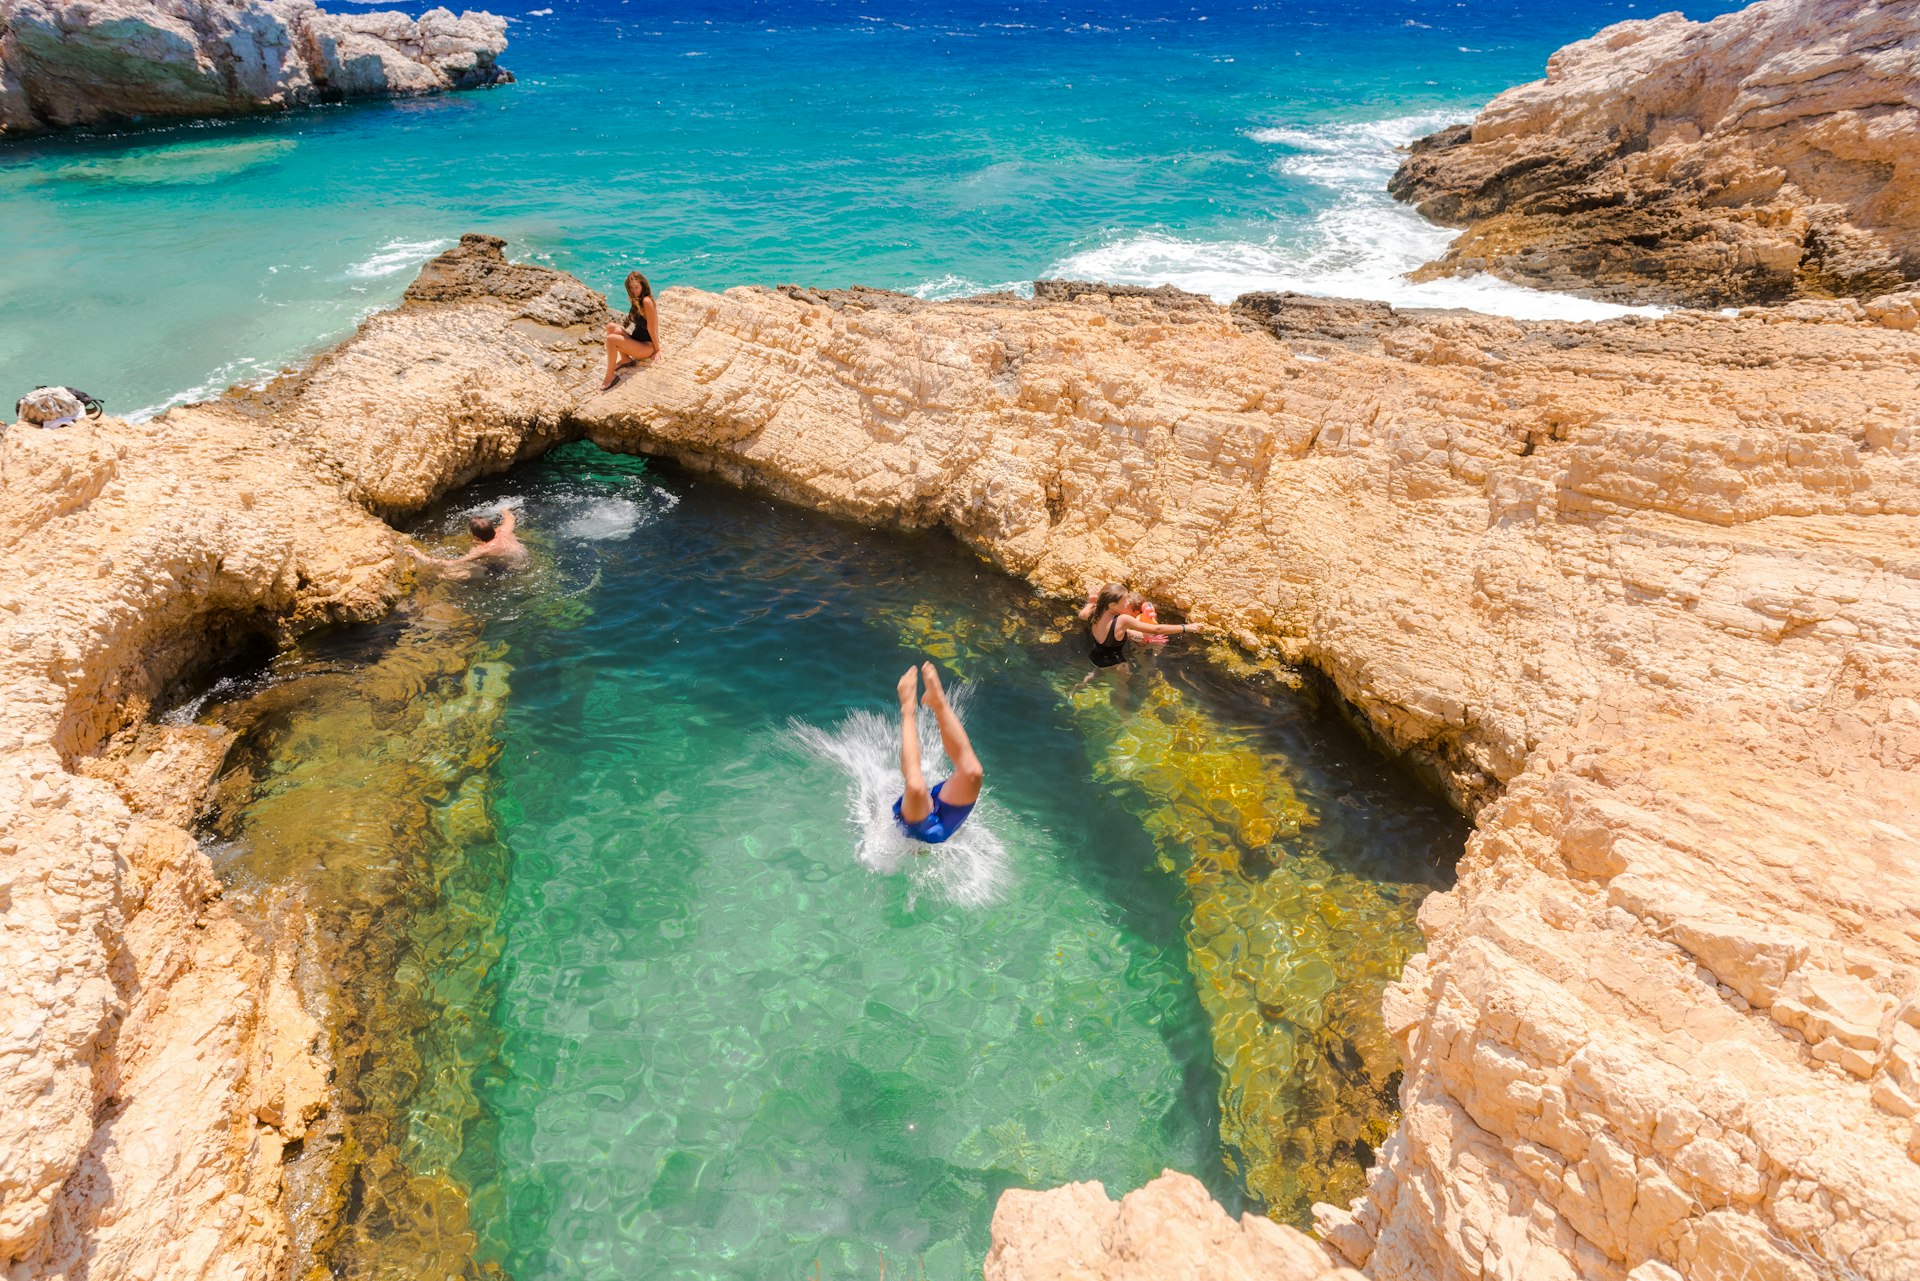 People dive into the Devil’s Eye pool, Koufonissi Island, Small Cyclades, Greece